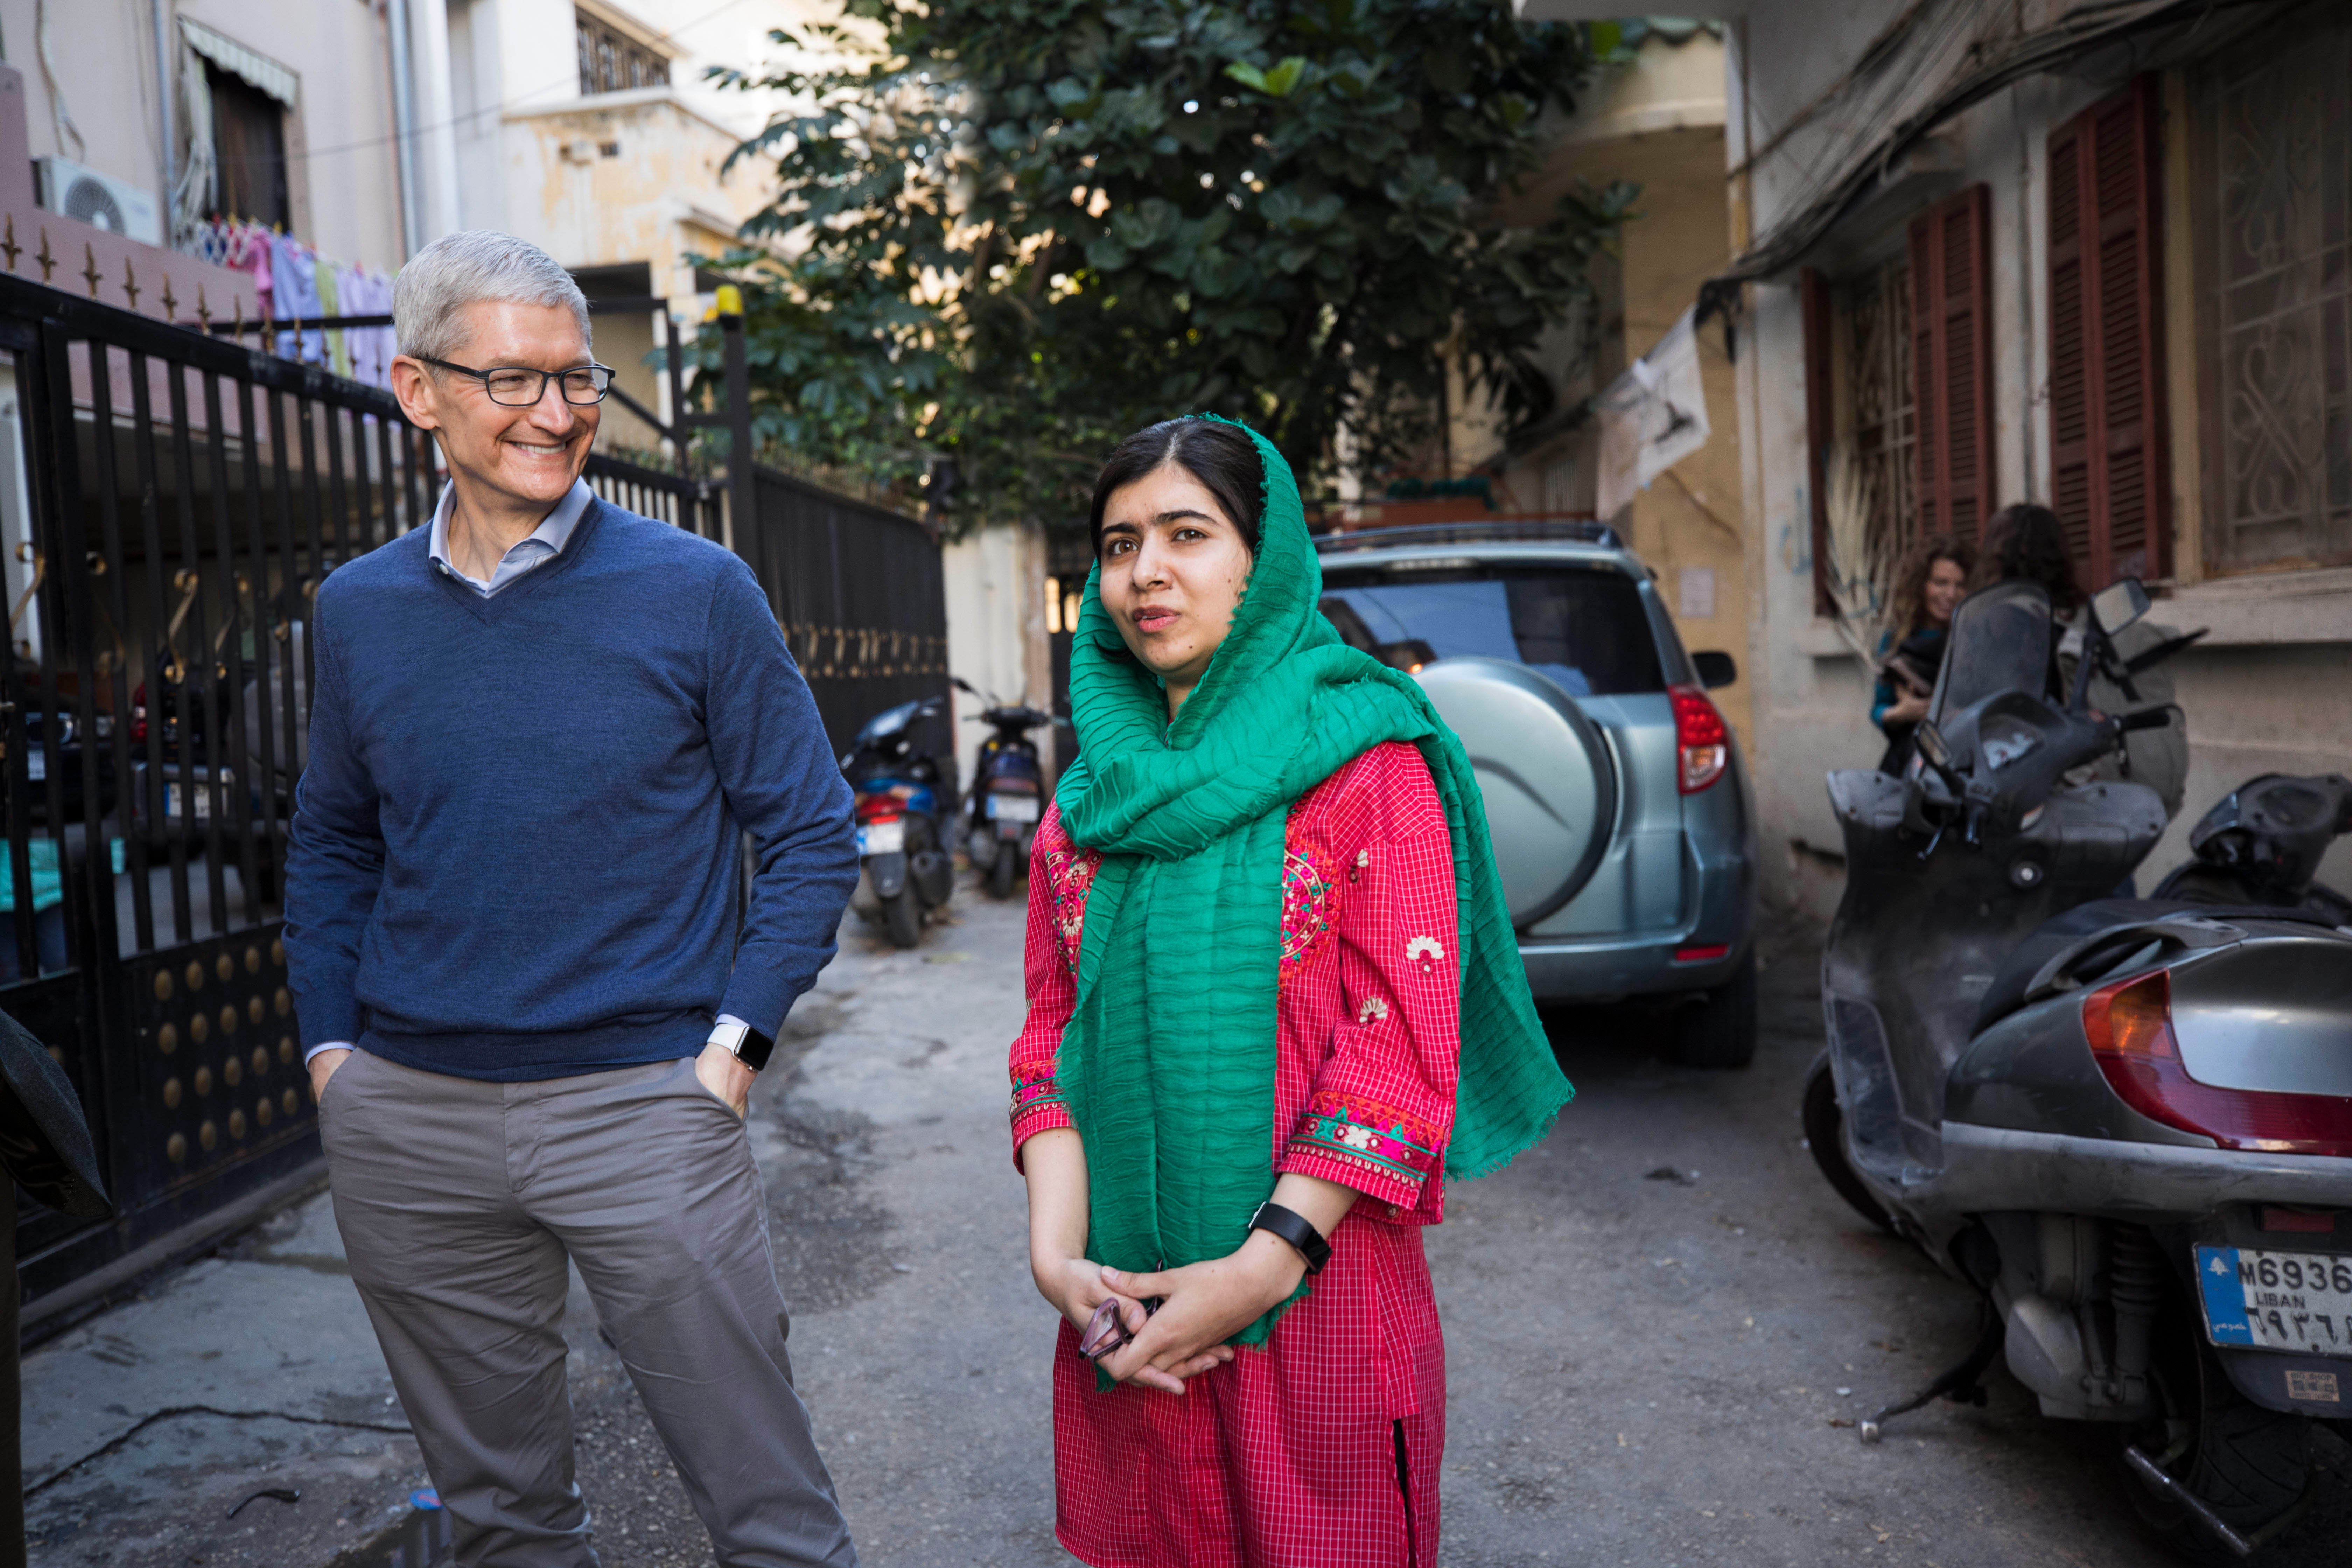 Apple partners with Malala Fund to help girls receive quality education